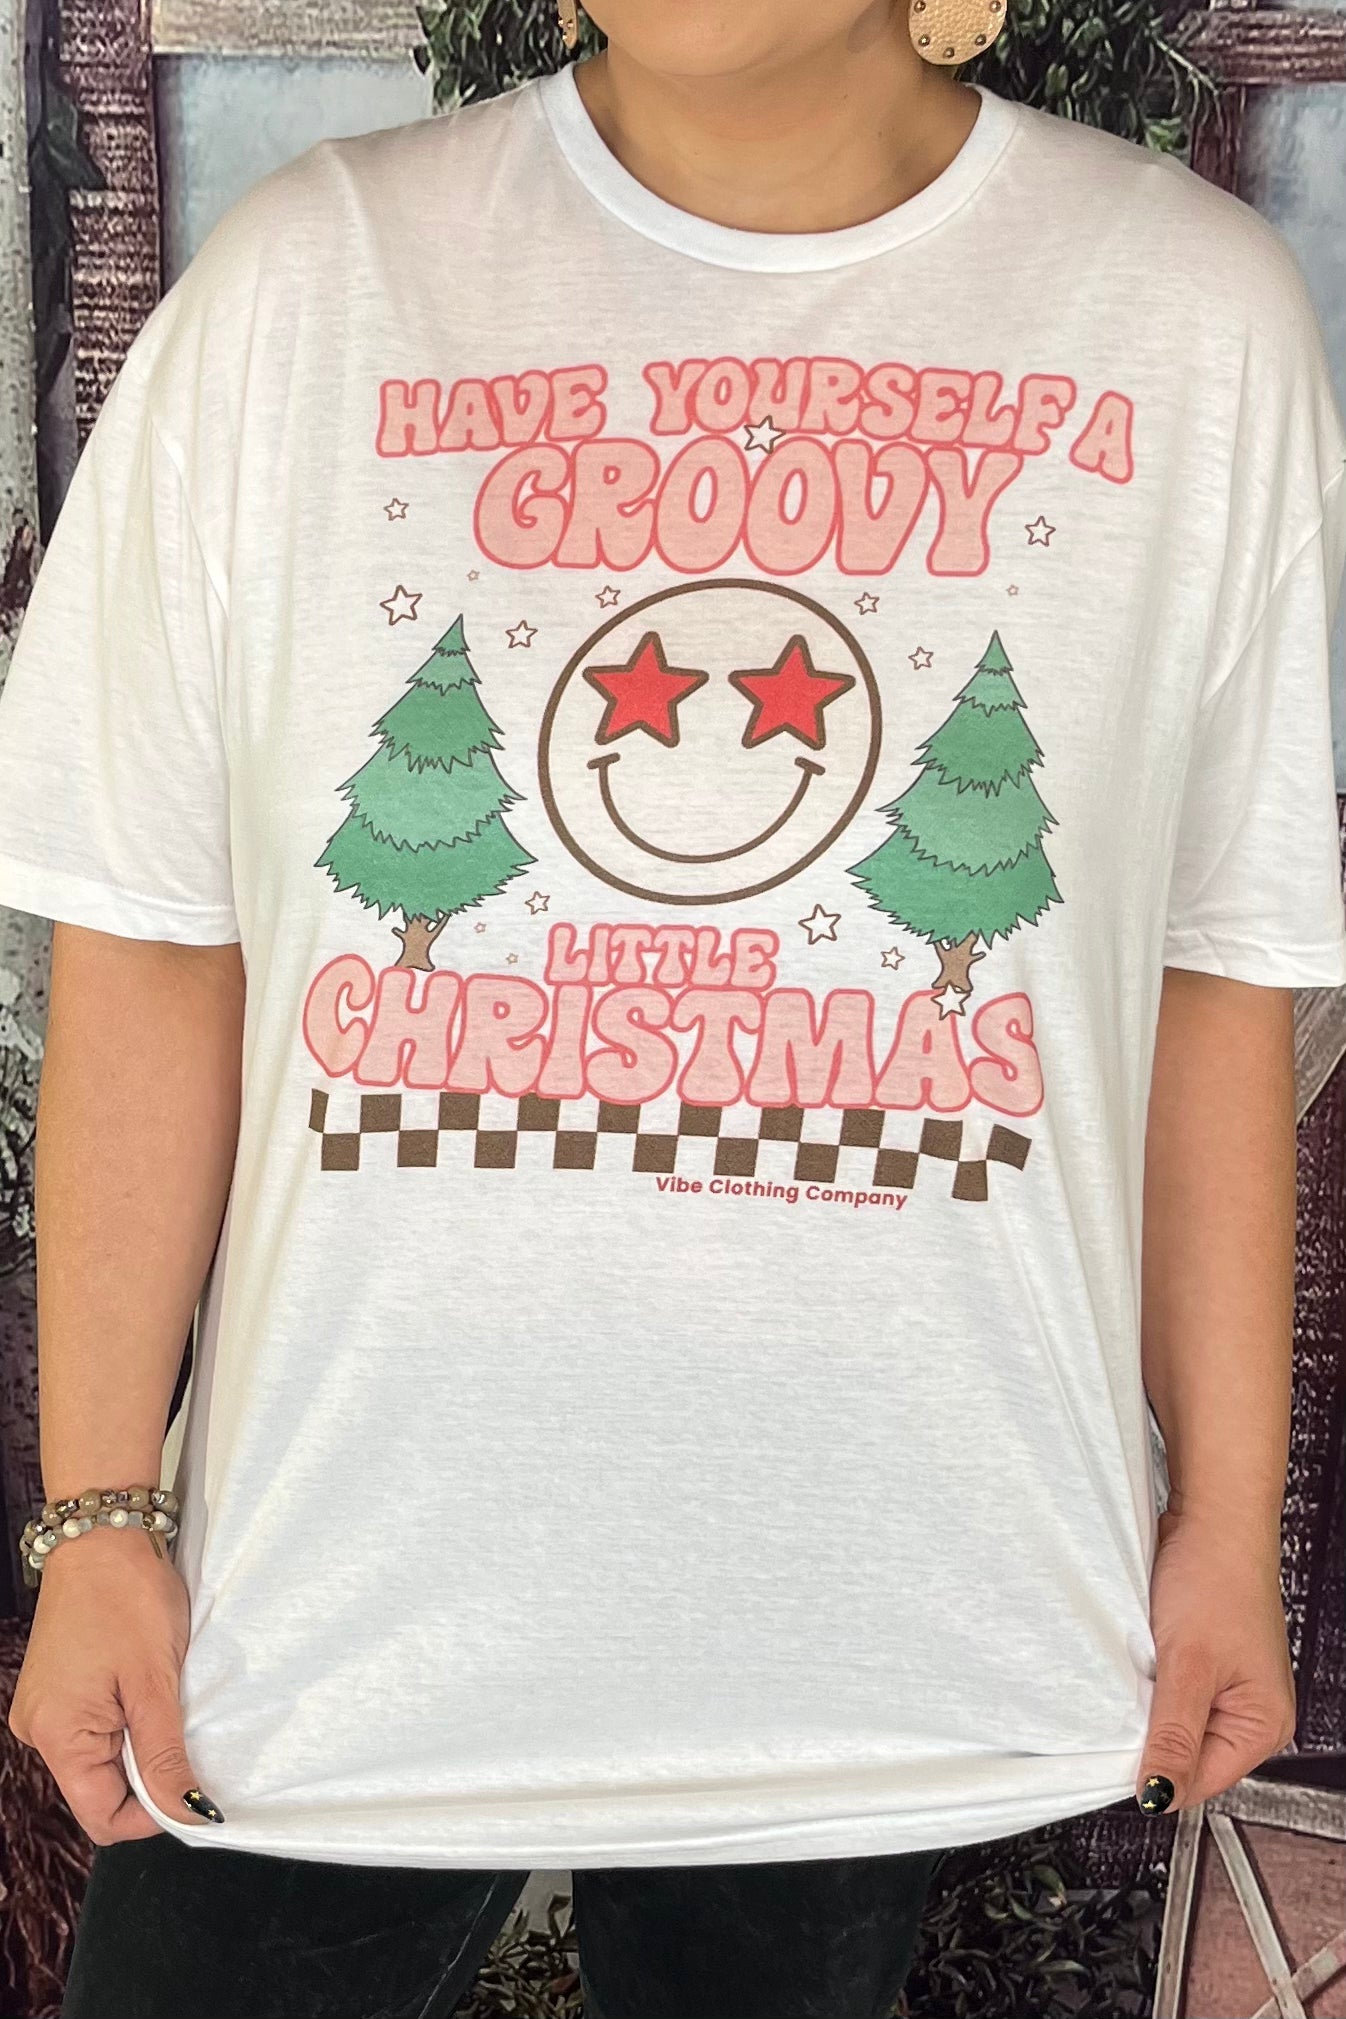 Groovy Christmas Graphic Tee graphic tee VCC 